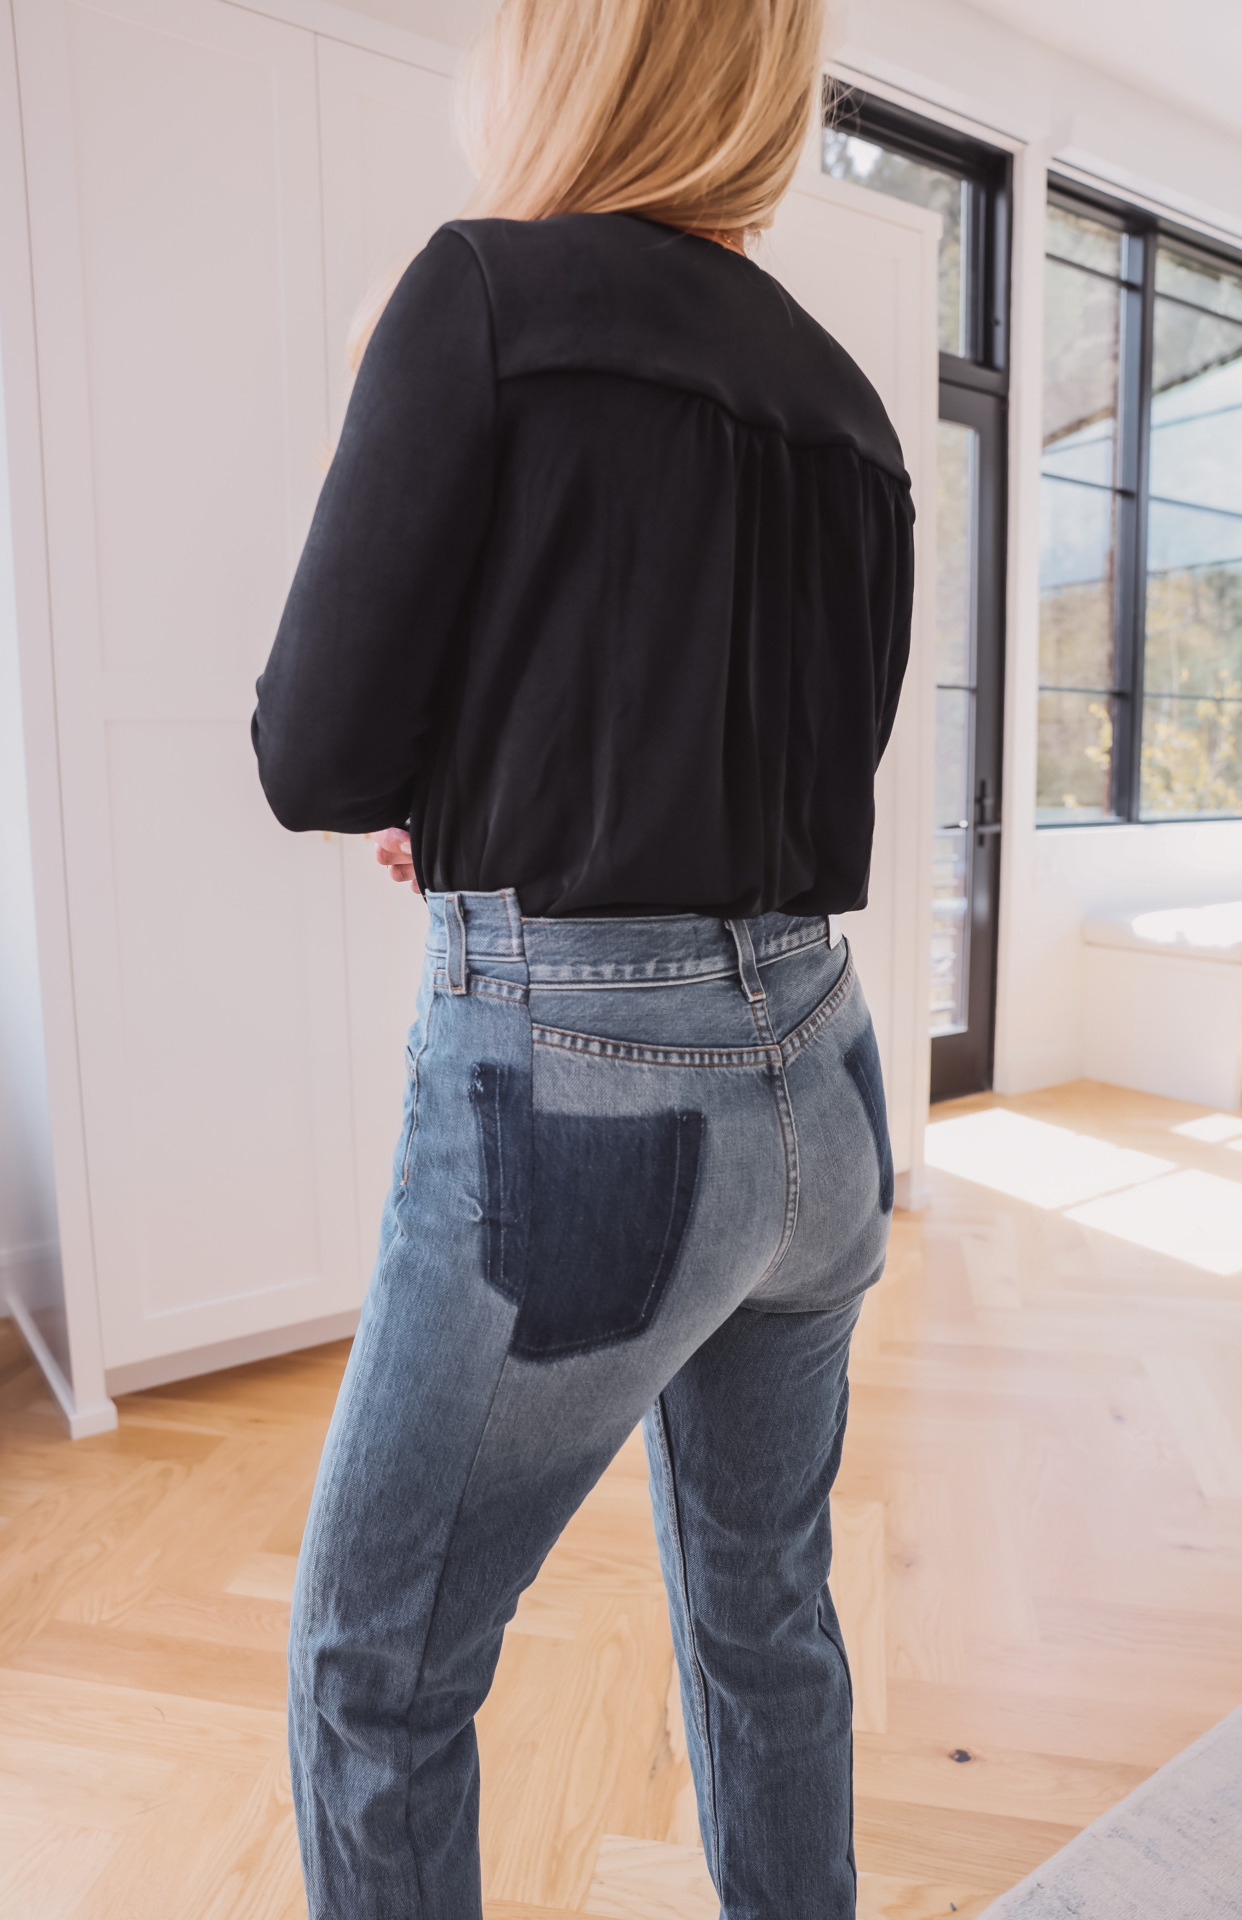 woman showing back details of the Split seam jeans and black top for jean trends